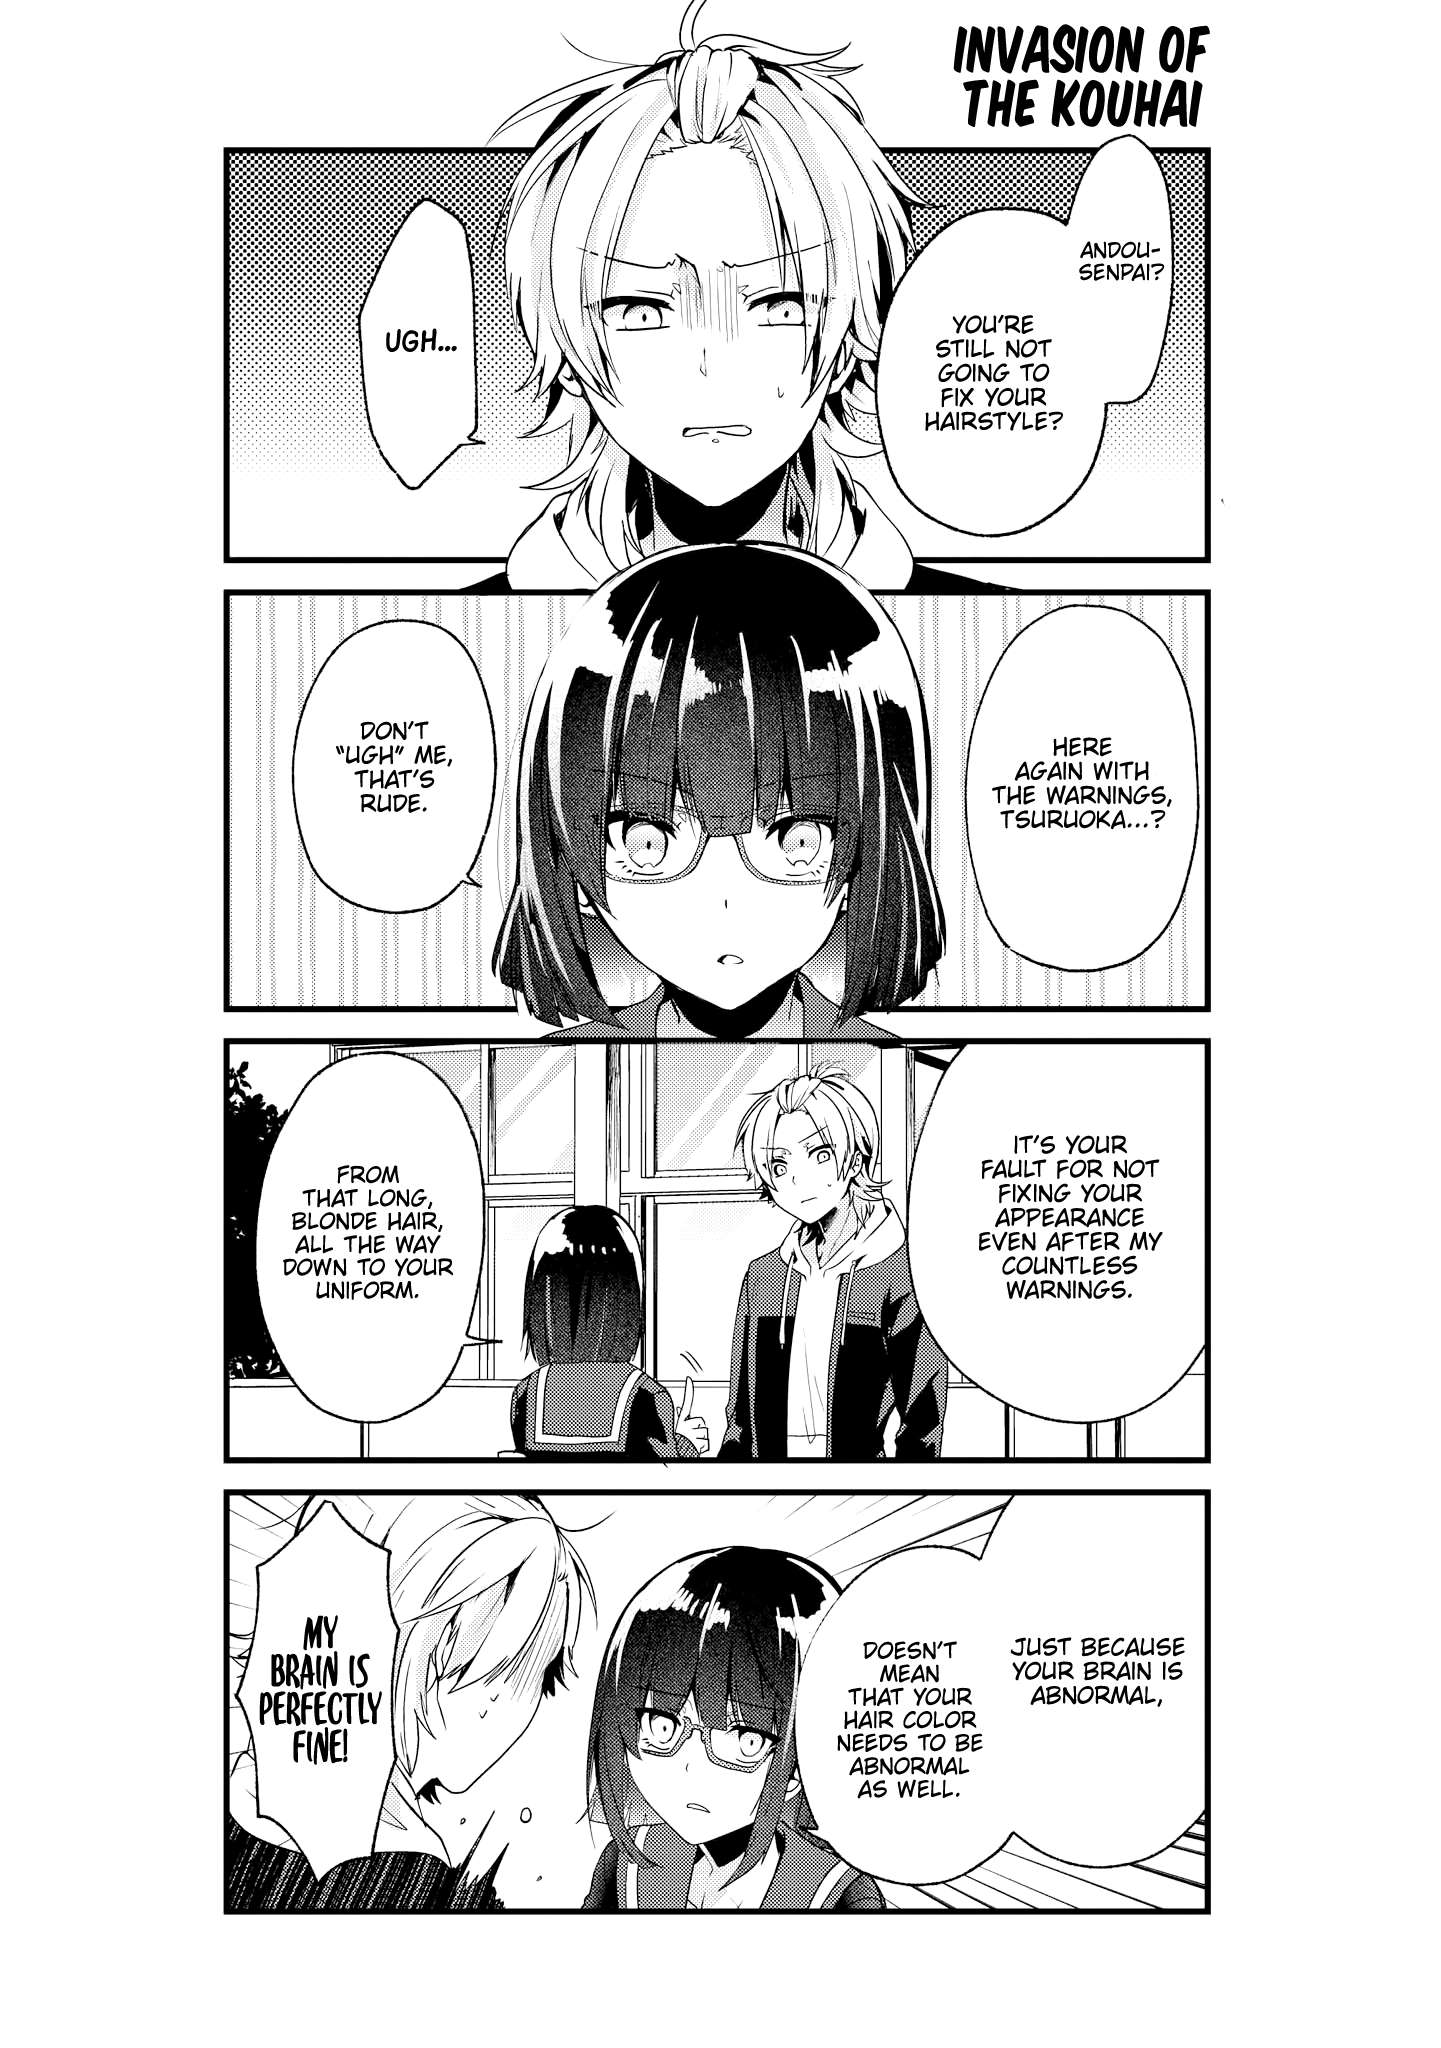 Just Flirting With a Cute, Annoying Kouhai - chapter 5 - #5